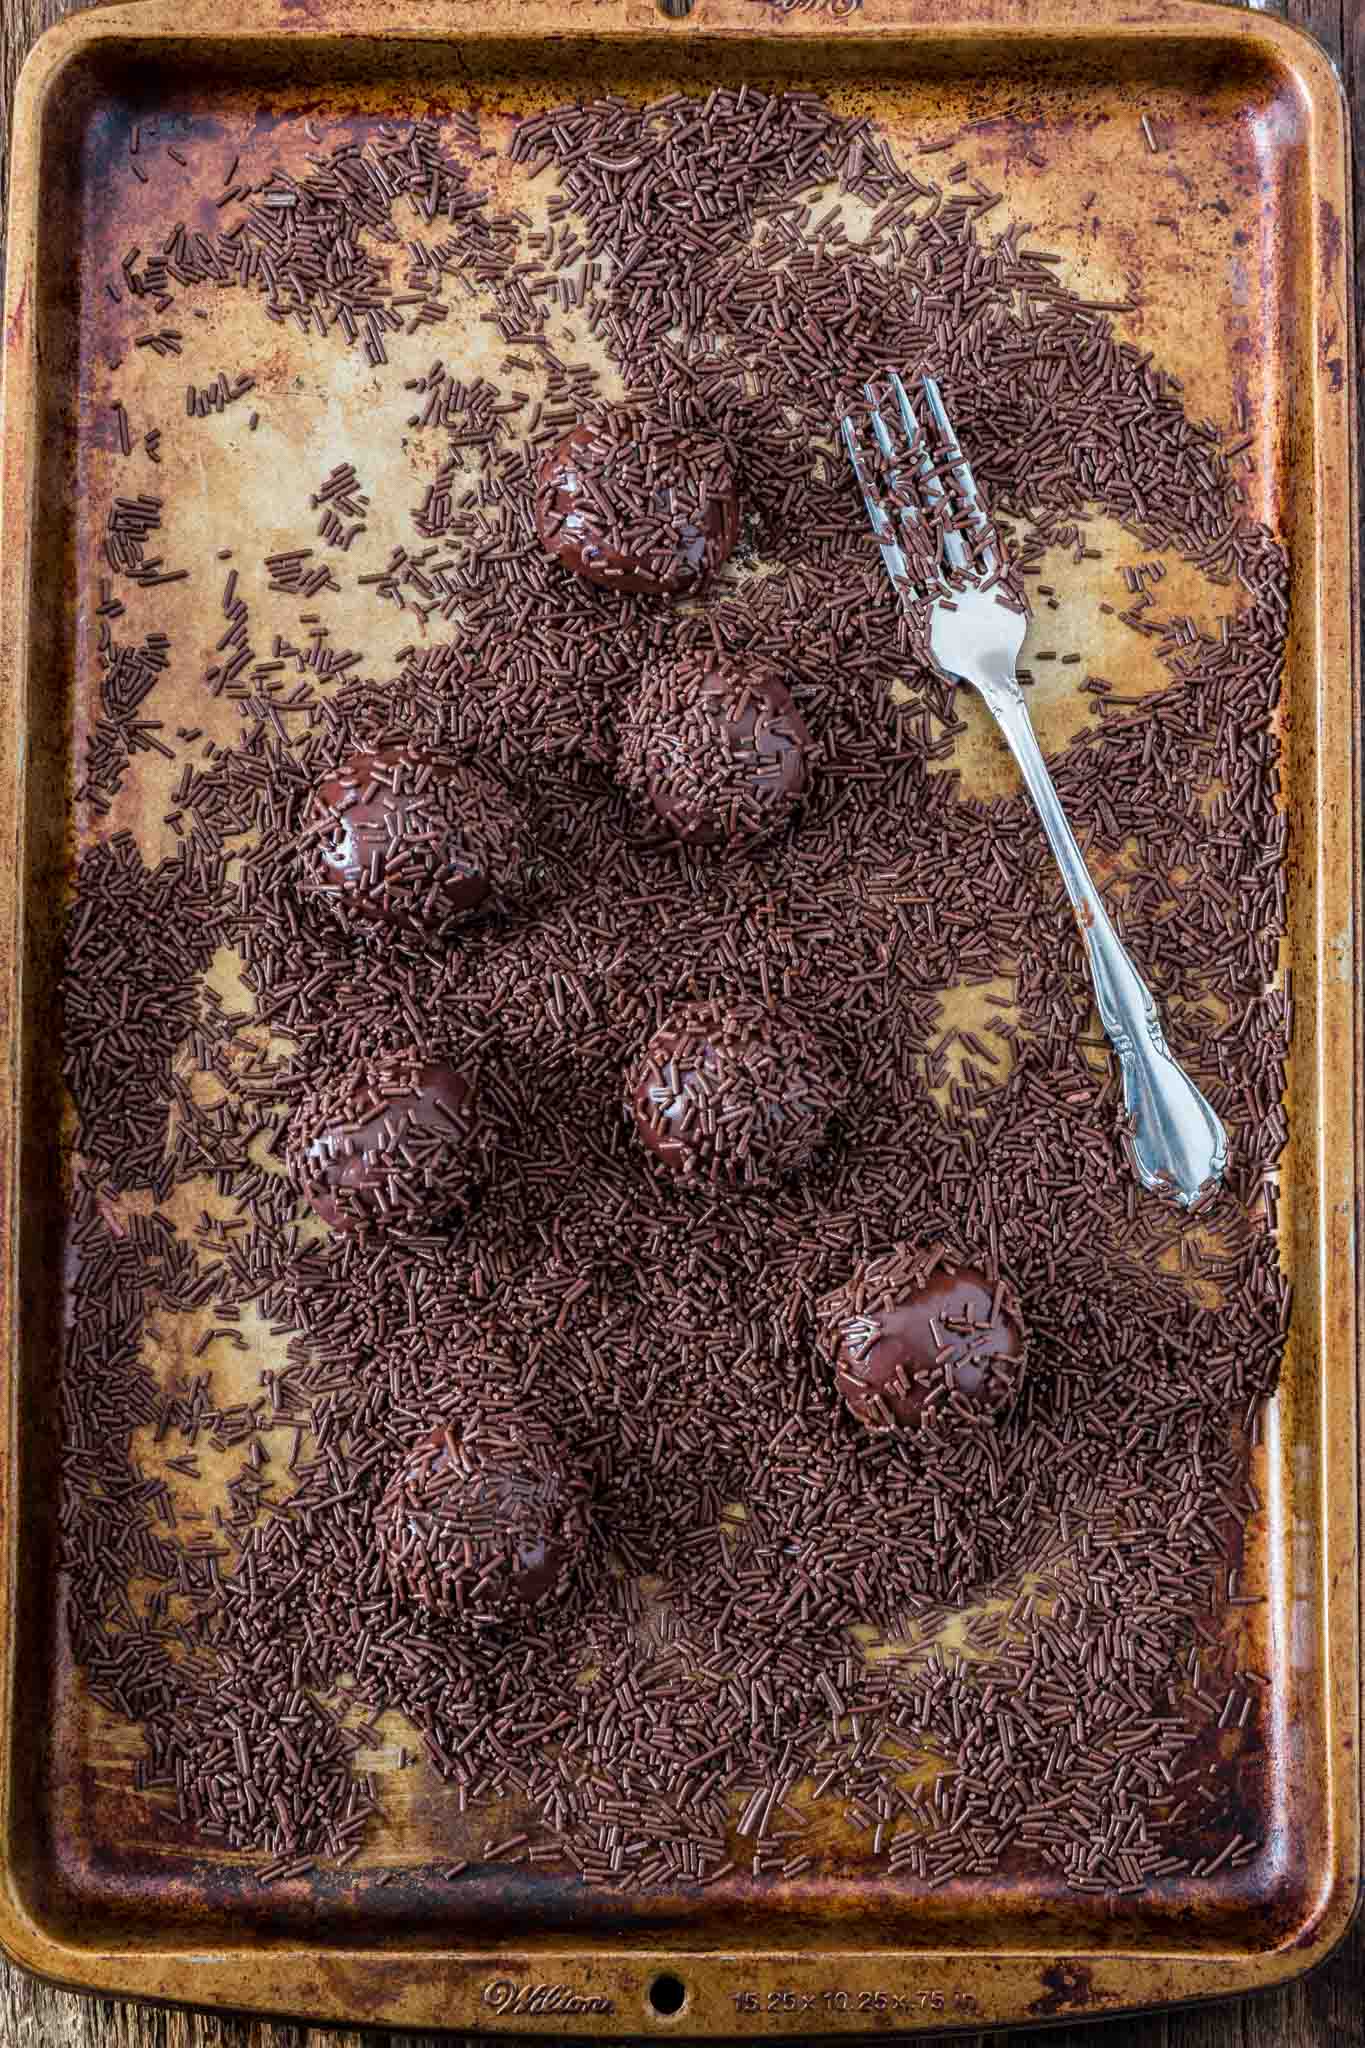 Brigadeiro Cake | www.oliviascuisine.com | Ask any Brazilian what is their favorite cake and you will always get the same answer: brigadeiro cake. Absolutely nothing compares to this rich, fudgy, moist chocolate cake! If you love brigadeiro, this is a must-try! (Recipe and food photography by @oliviascuisine.)